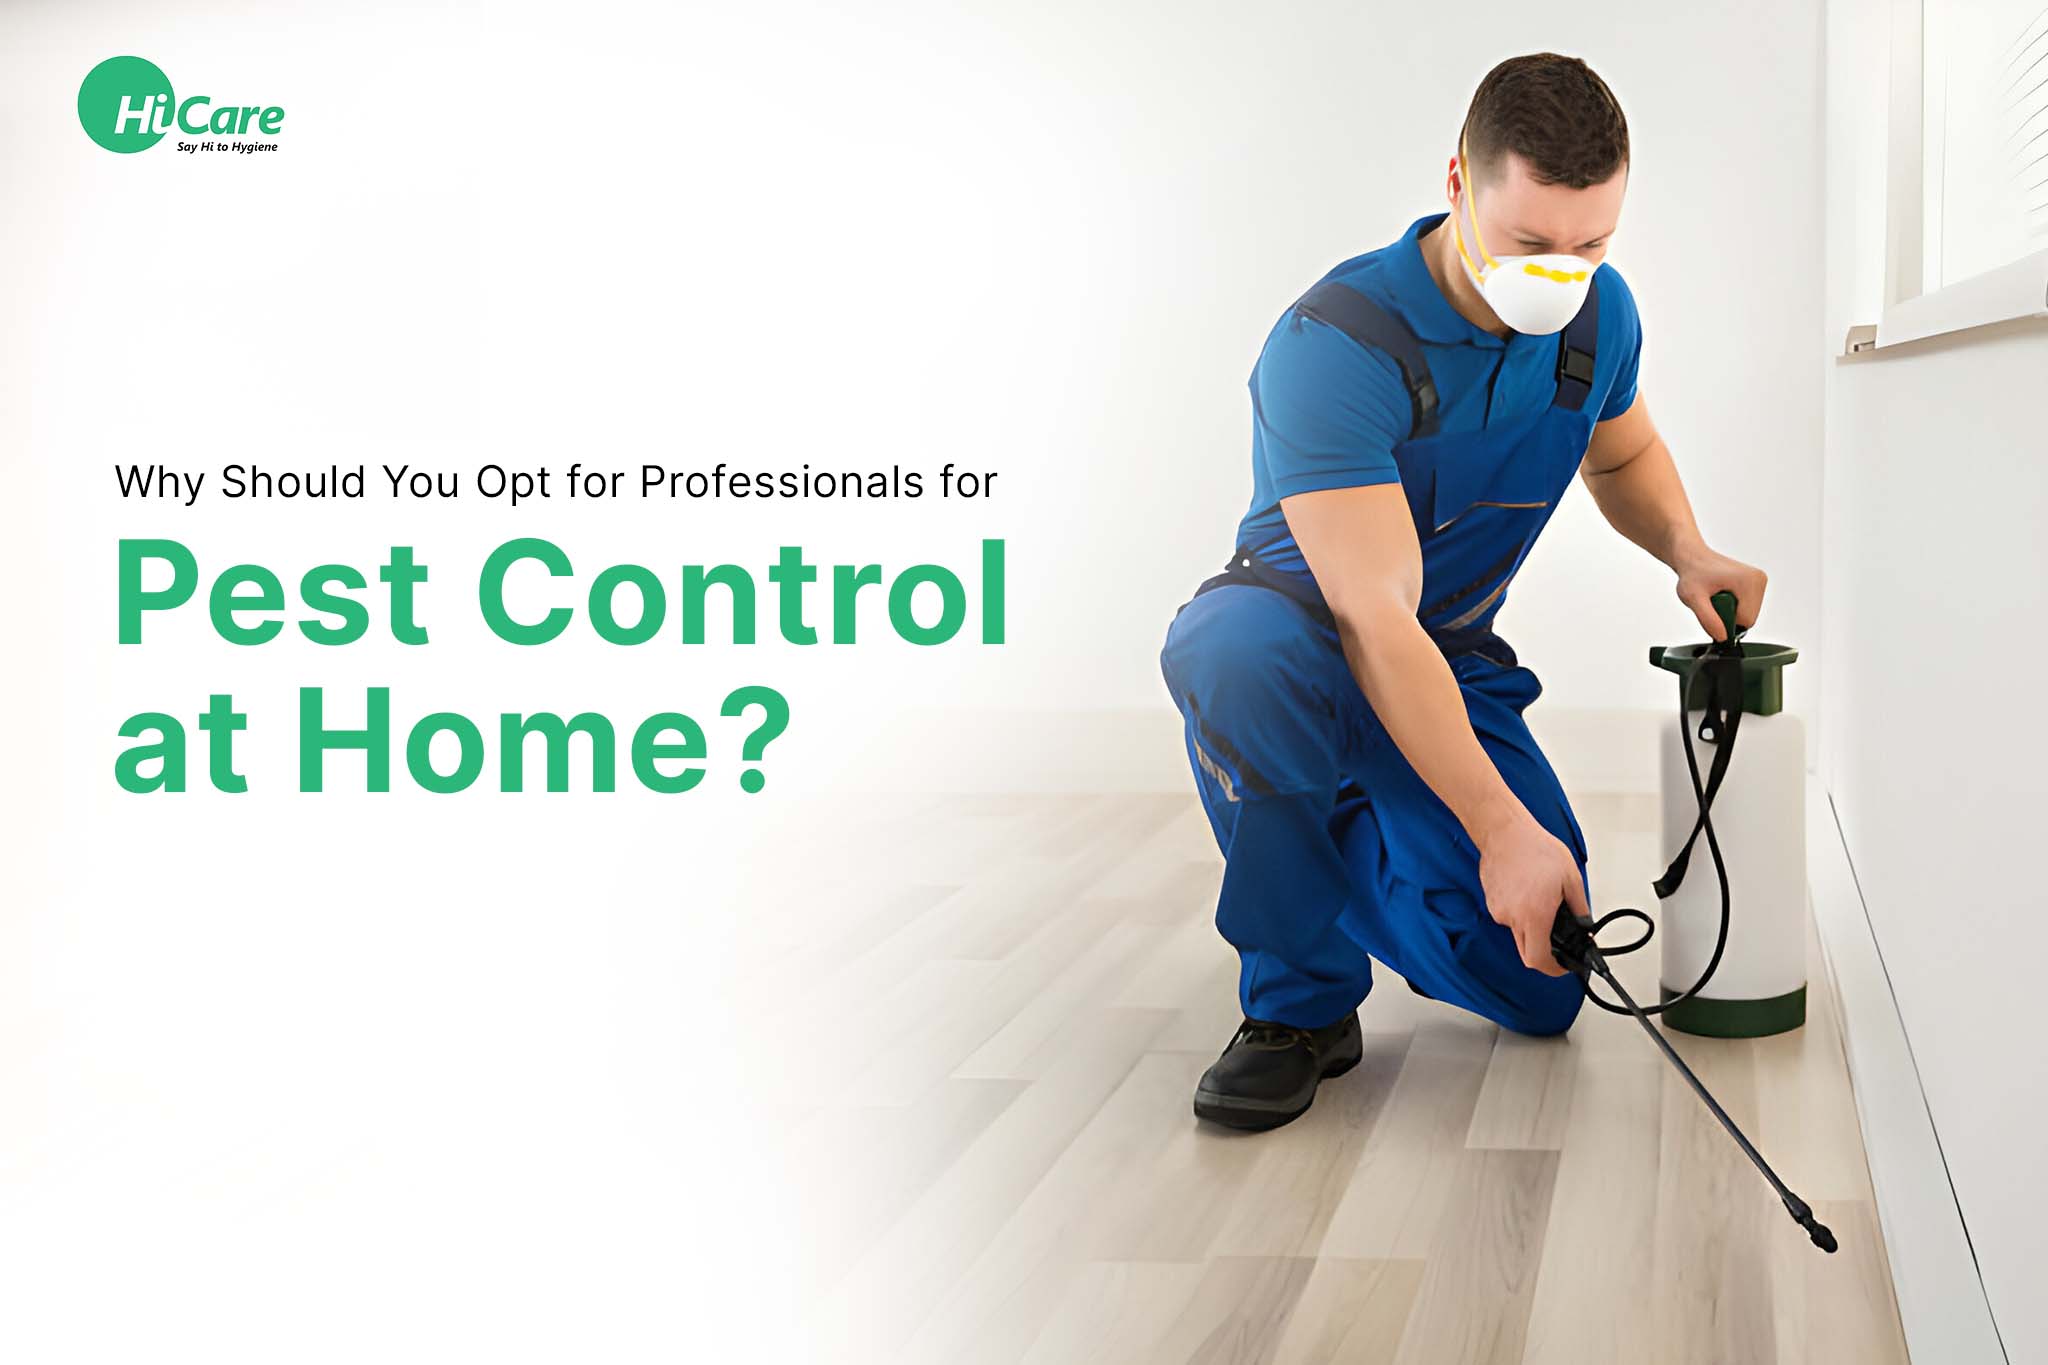 Why Should You Opt for Professionals for Pest Control at Home?